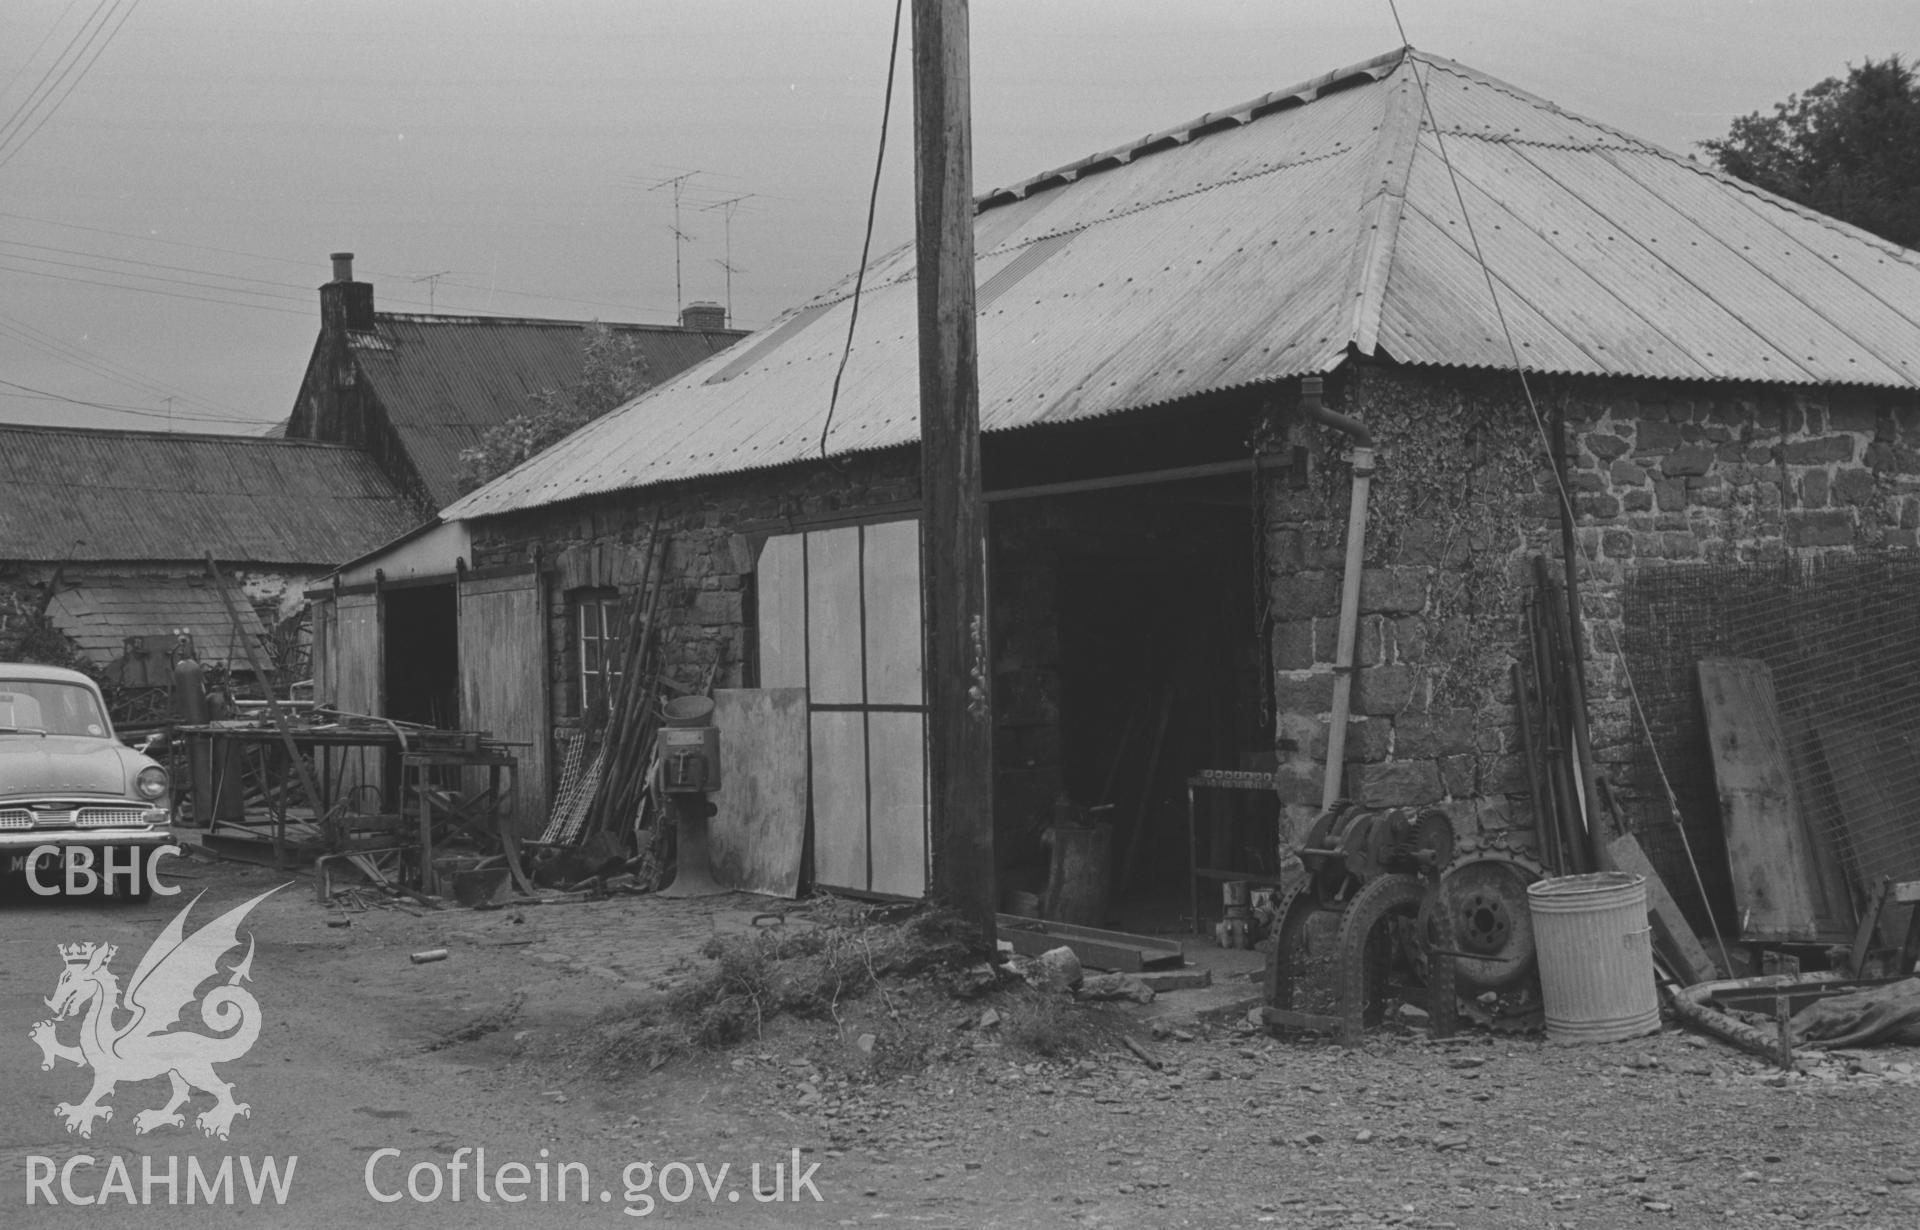 Digital copy of a black and white negative showing forge on the east side of the road at the south end of Talsarn, south east of Aberaeron. Photographed by Arthur O. Chater on 5th September 1966 looking north east from Grid Reference SN 545 563.